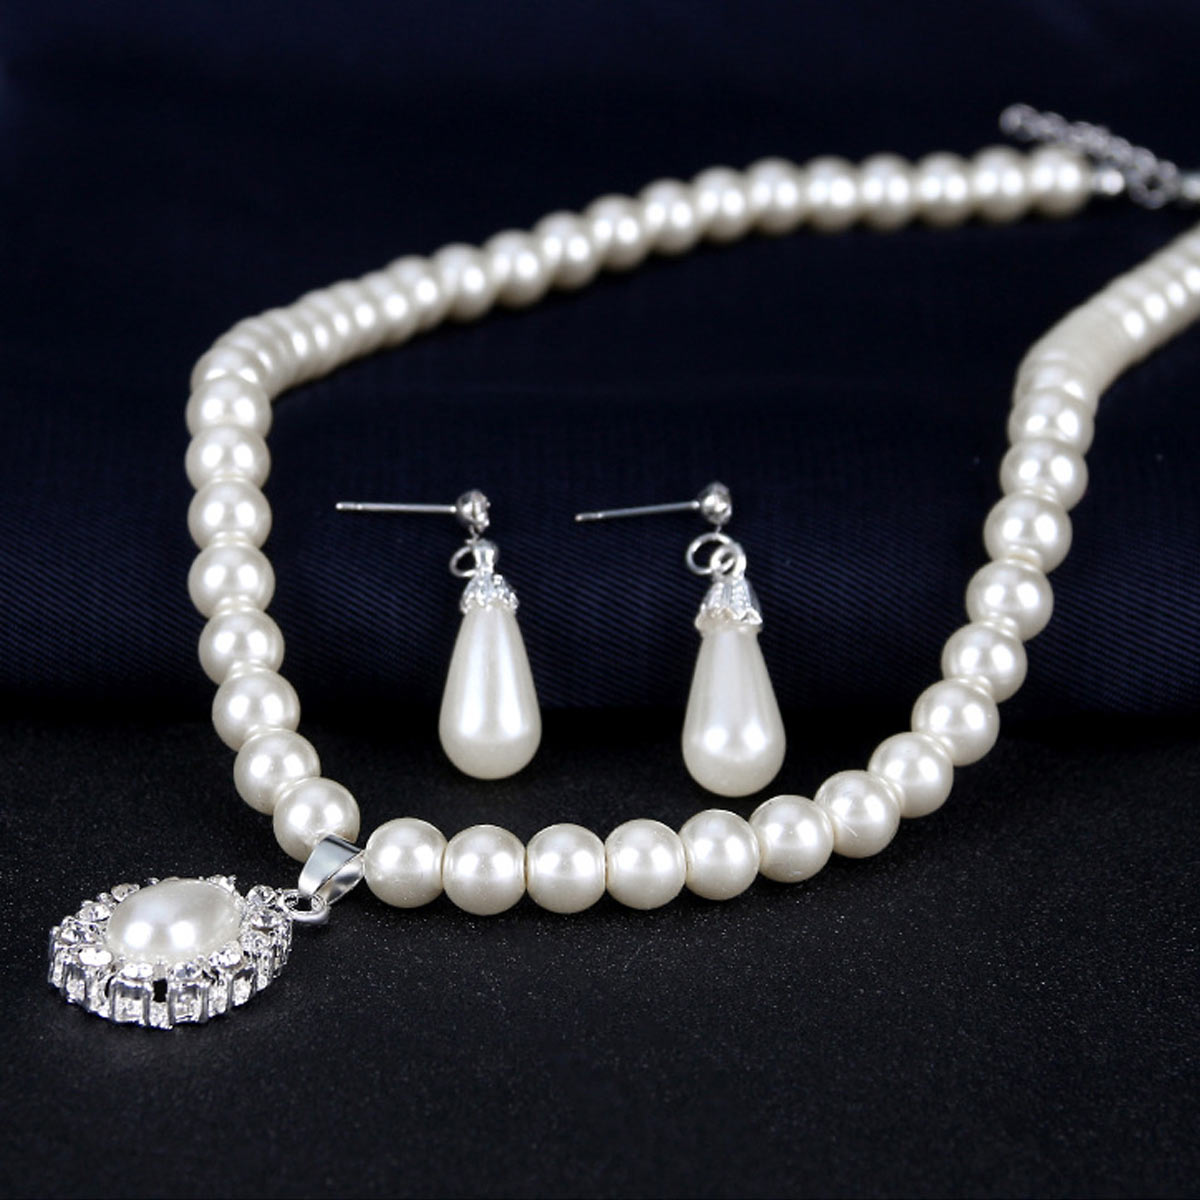 Cream Rhinestone Pearl Water Drop Shape Earrings and Necklace